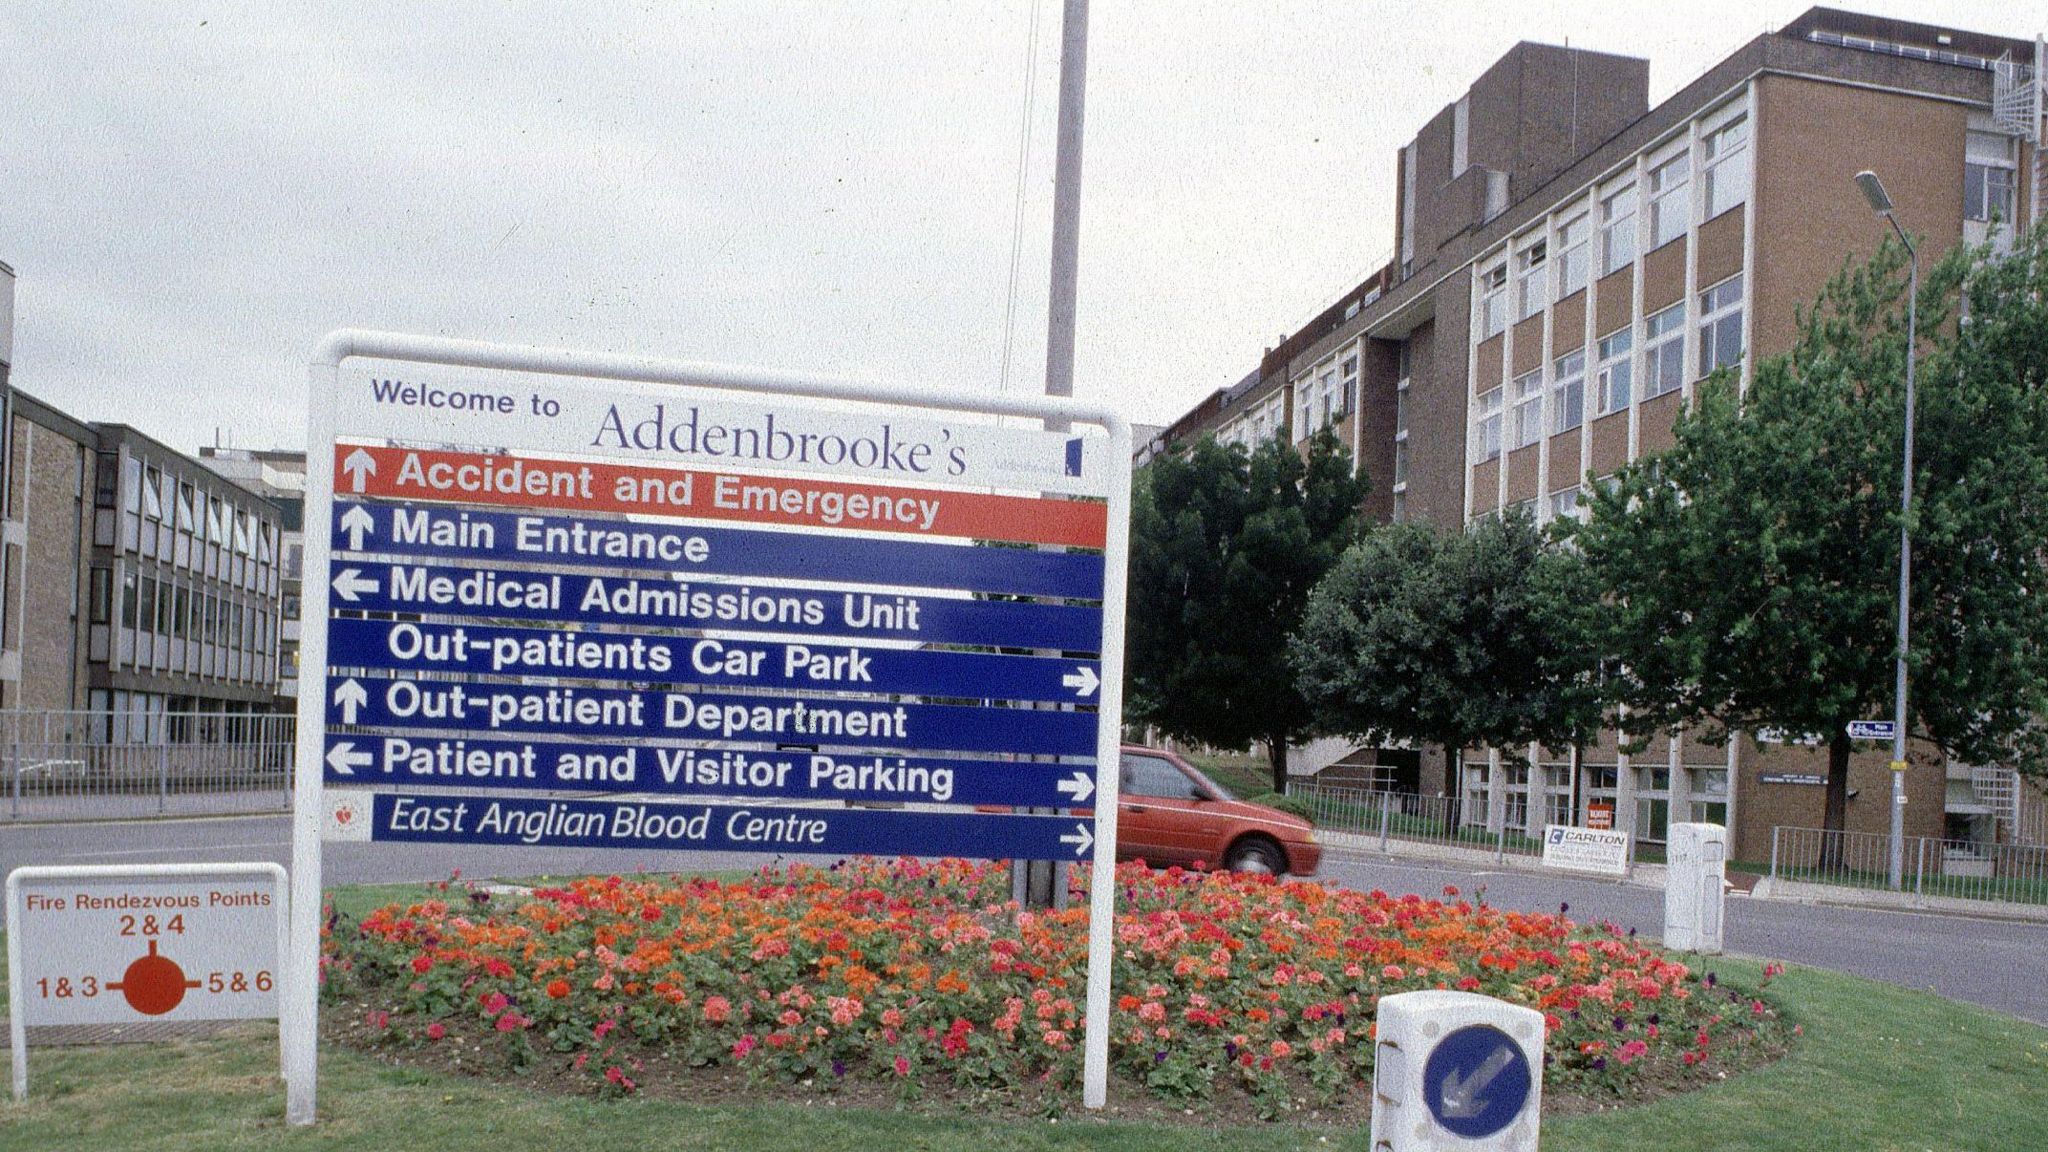 A large sign outside Addenbrooke's Hospital, Cambridge, telling people where the departments are